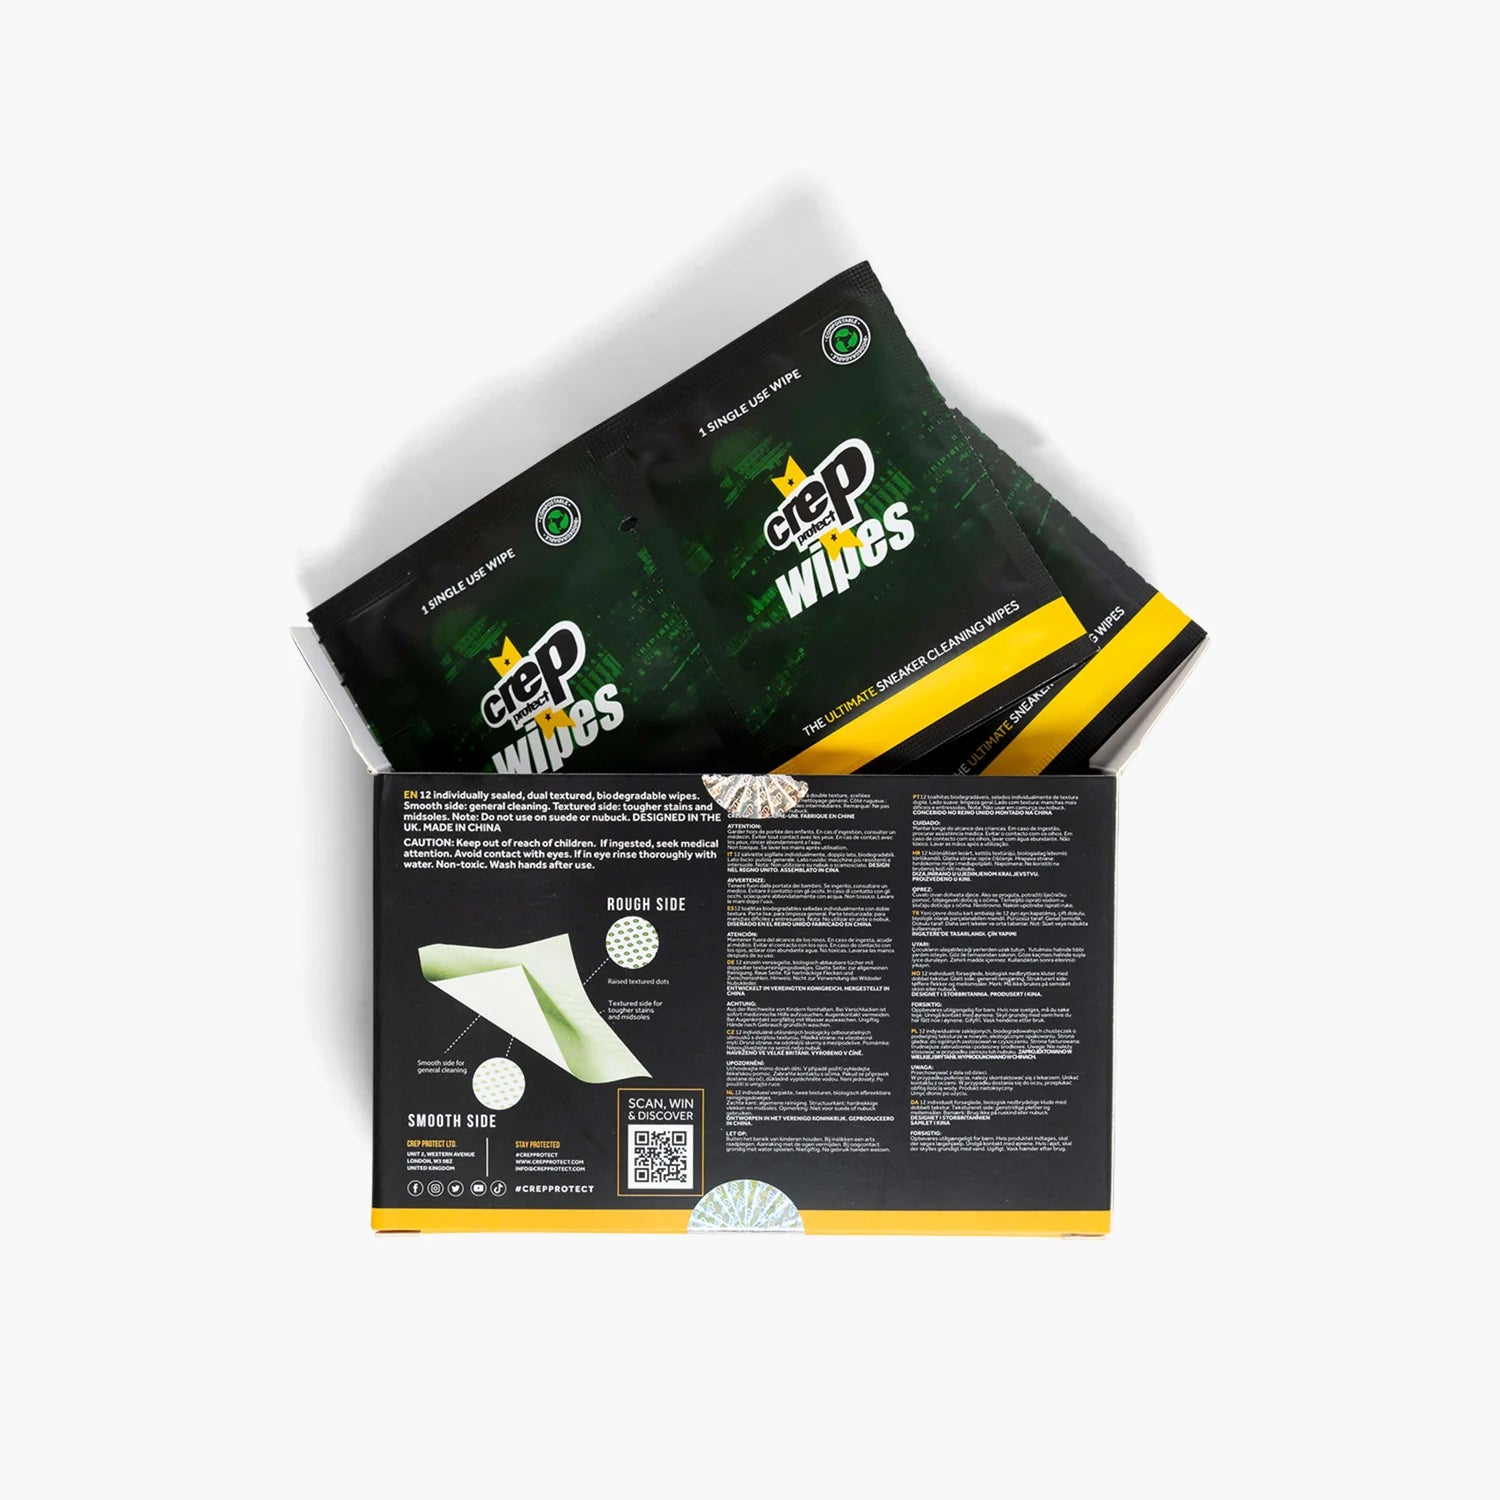 Crep Protect - 'Sneaker Cleaning Wipes'